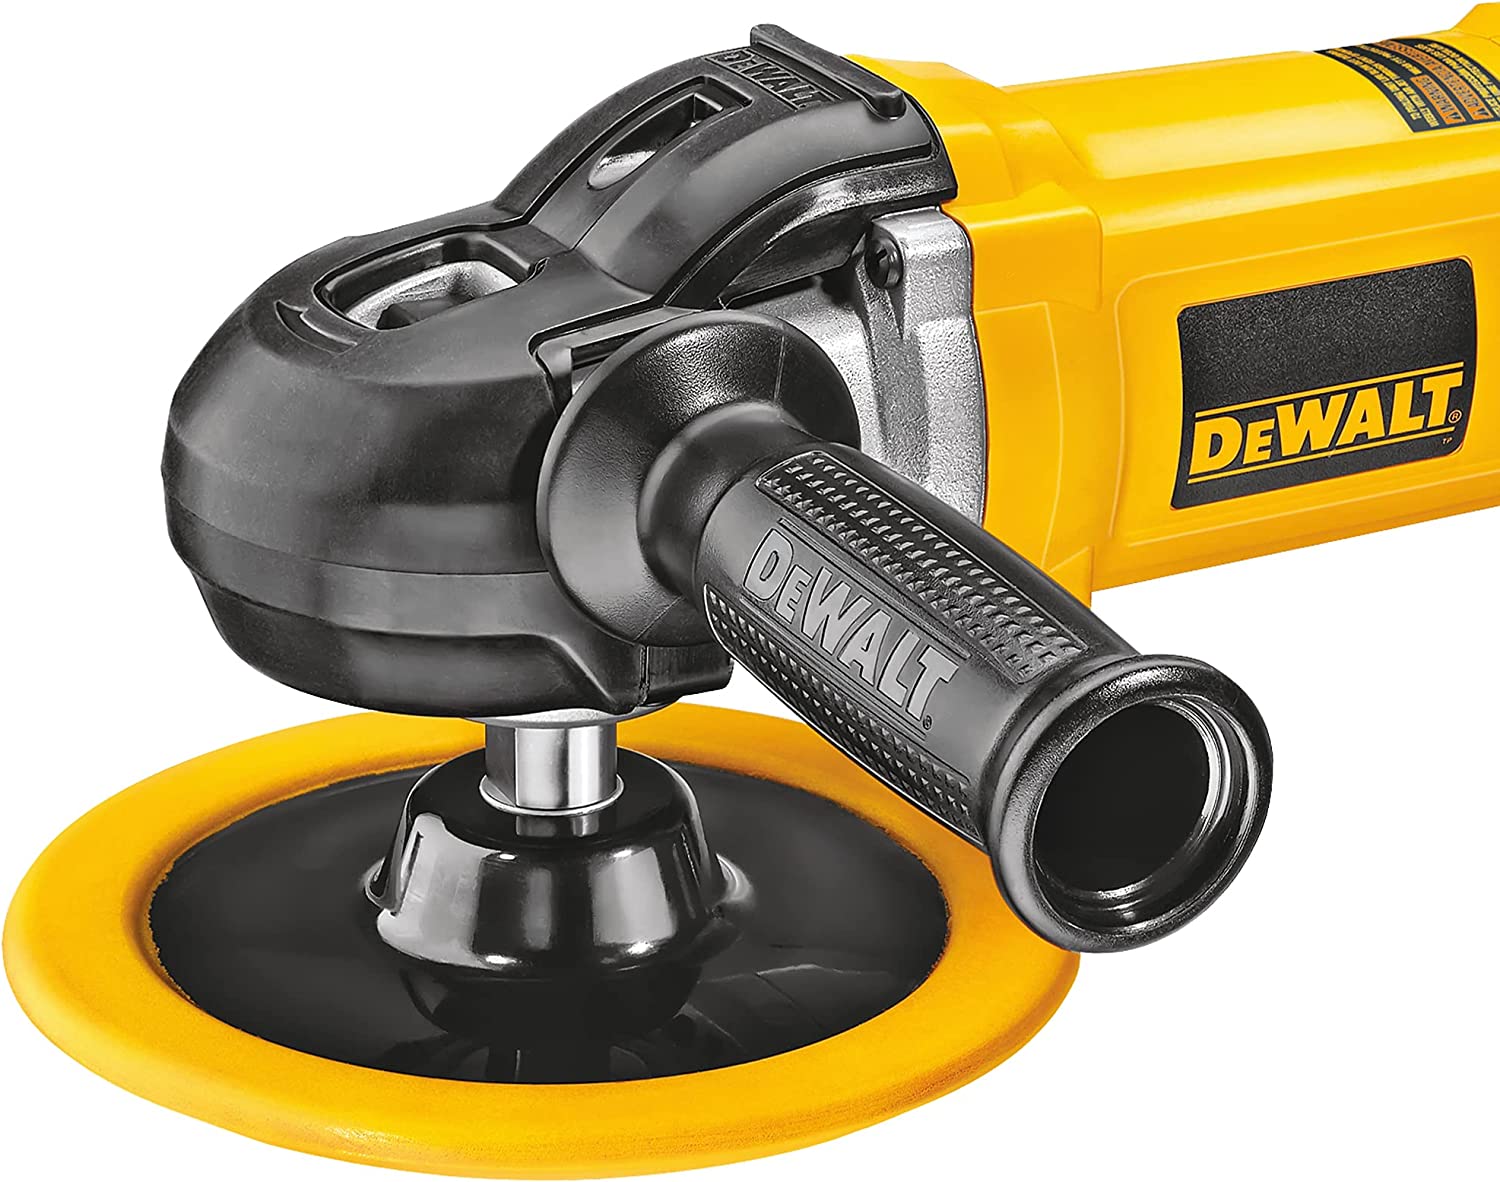 DWP849X 7-inch Variable Speed Angle Grinder - Xtreme Polishing Systems; Dewalt variable speed grinder.